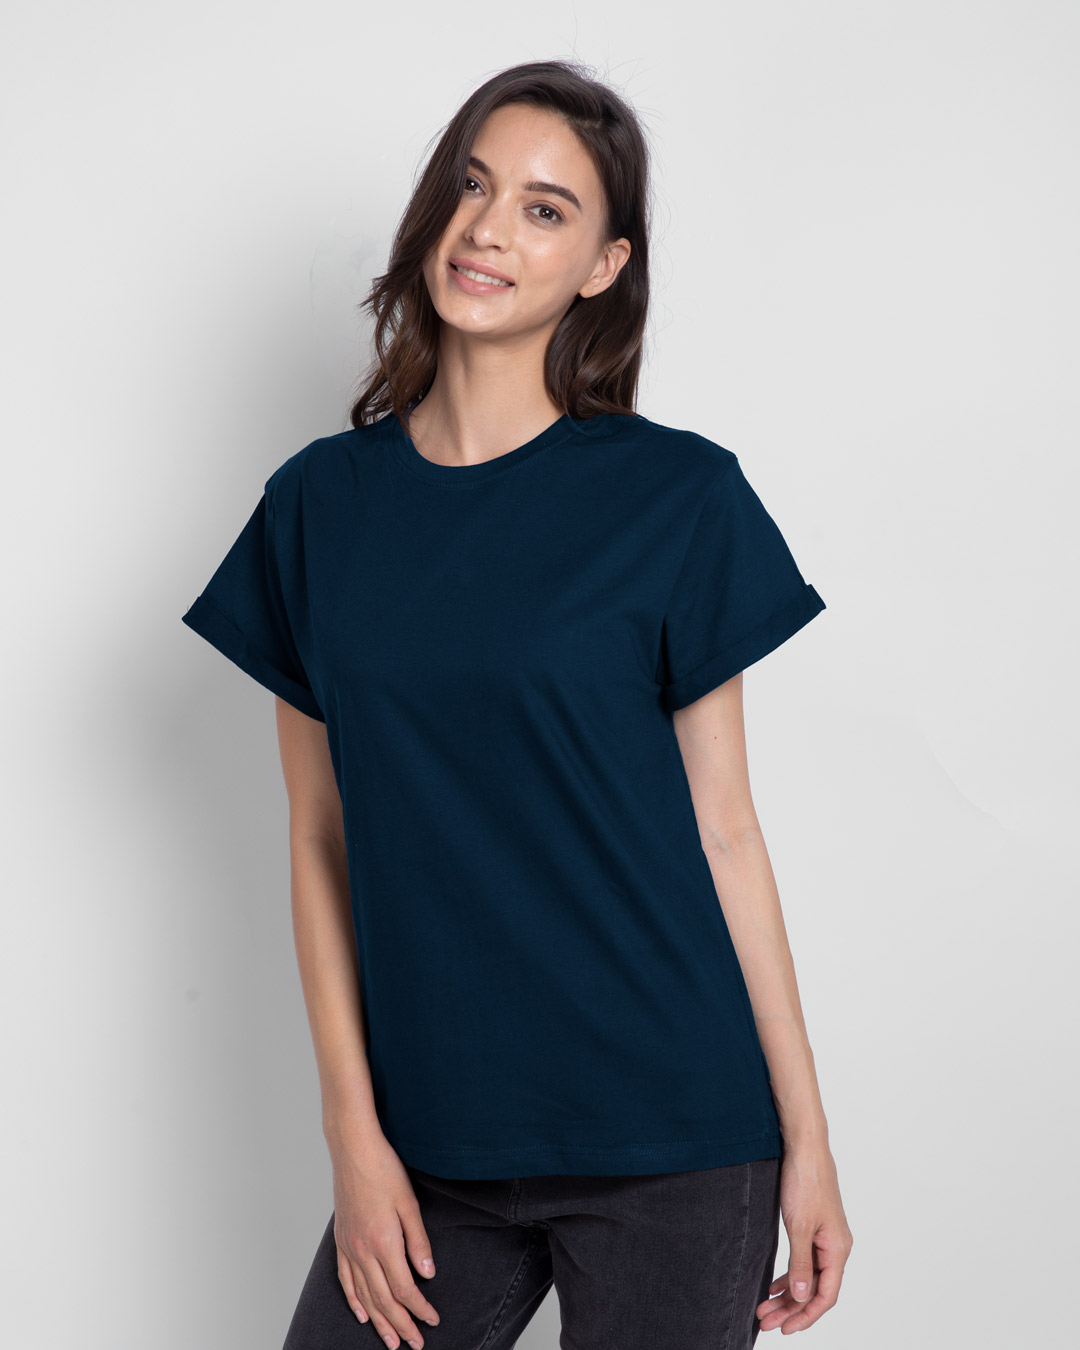 T a shirt navy wear to with blue what What to